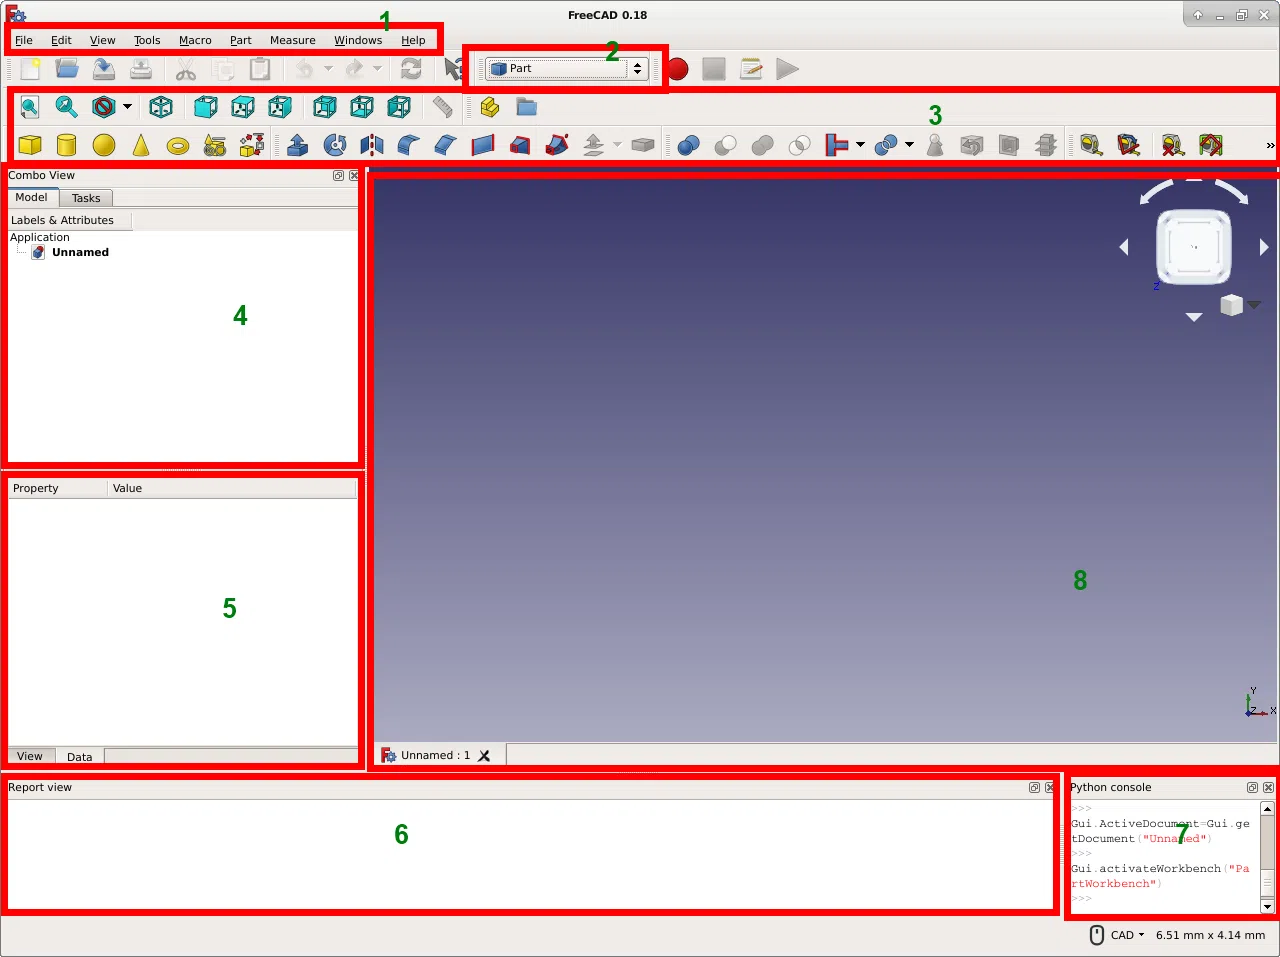 Main features of the FreeCAD interface